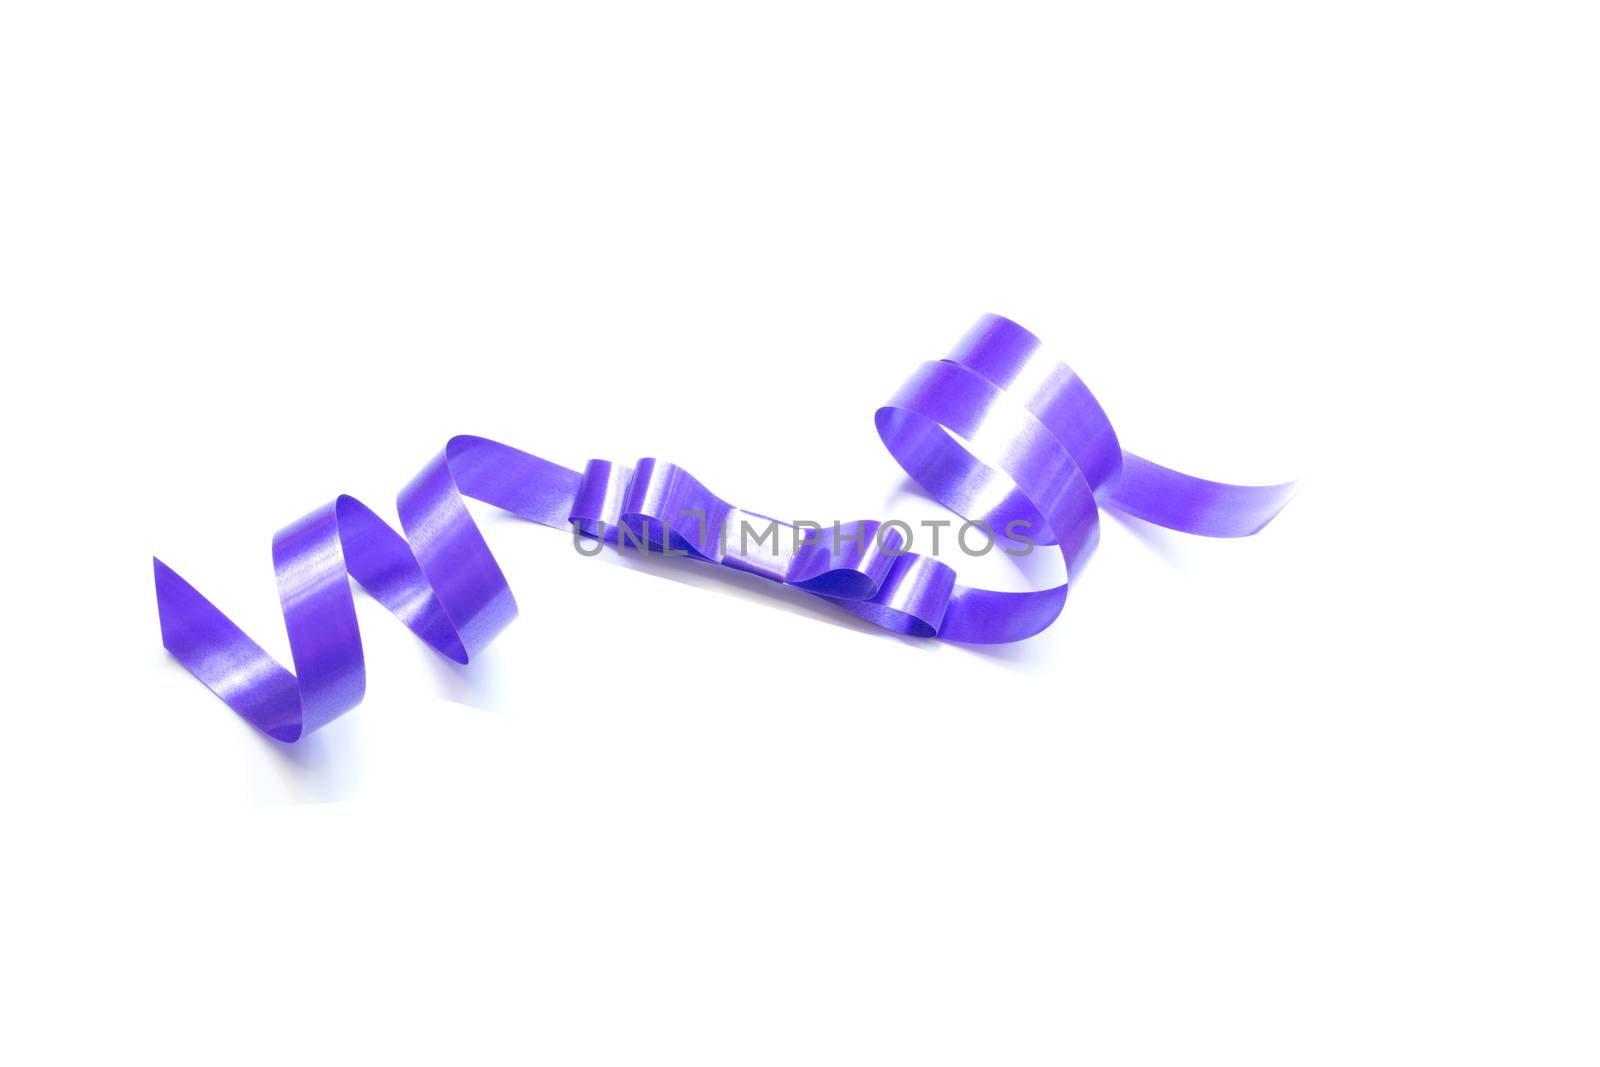 the spiral purple ribbon isolated on white background. by kirisa99